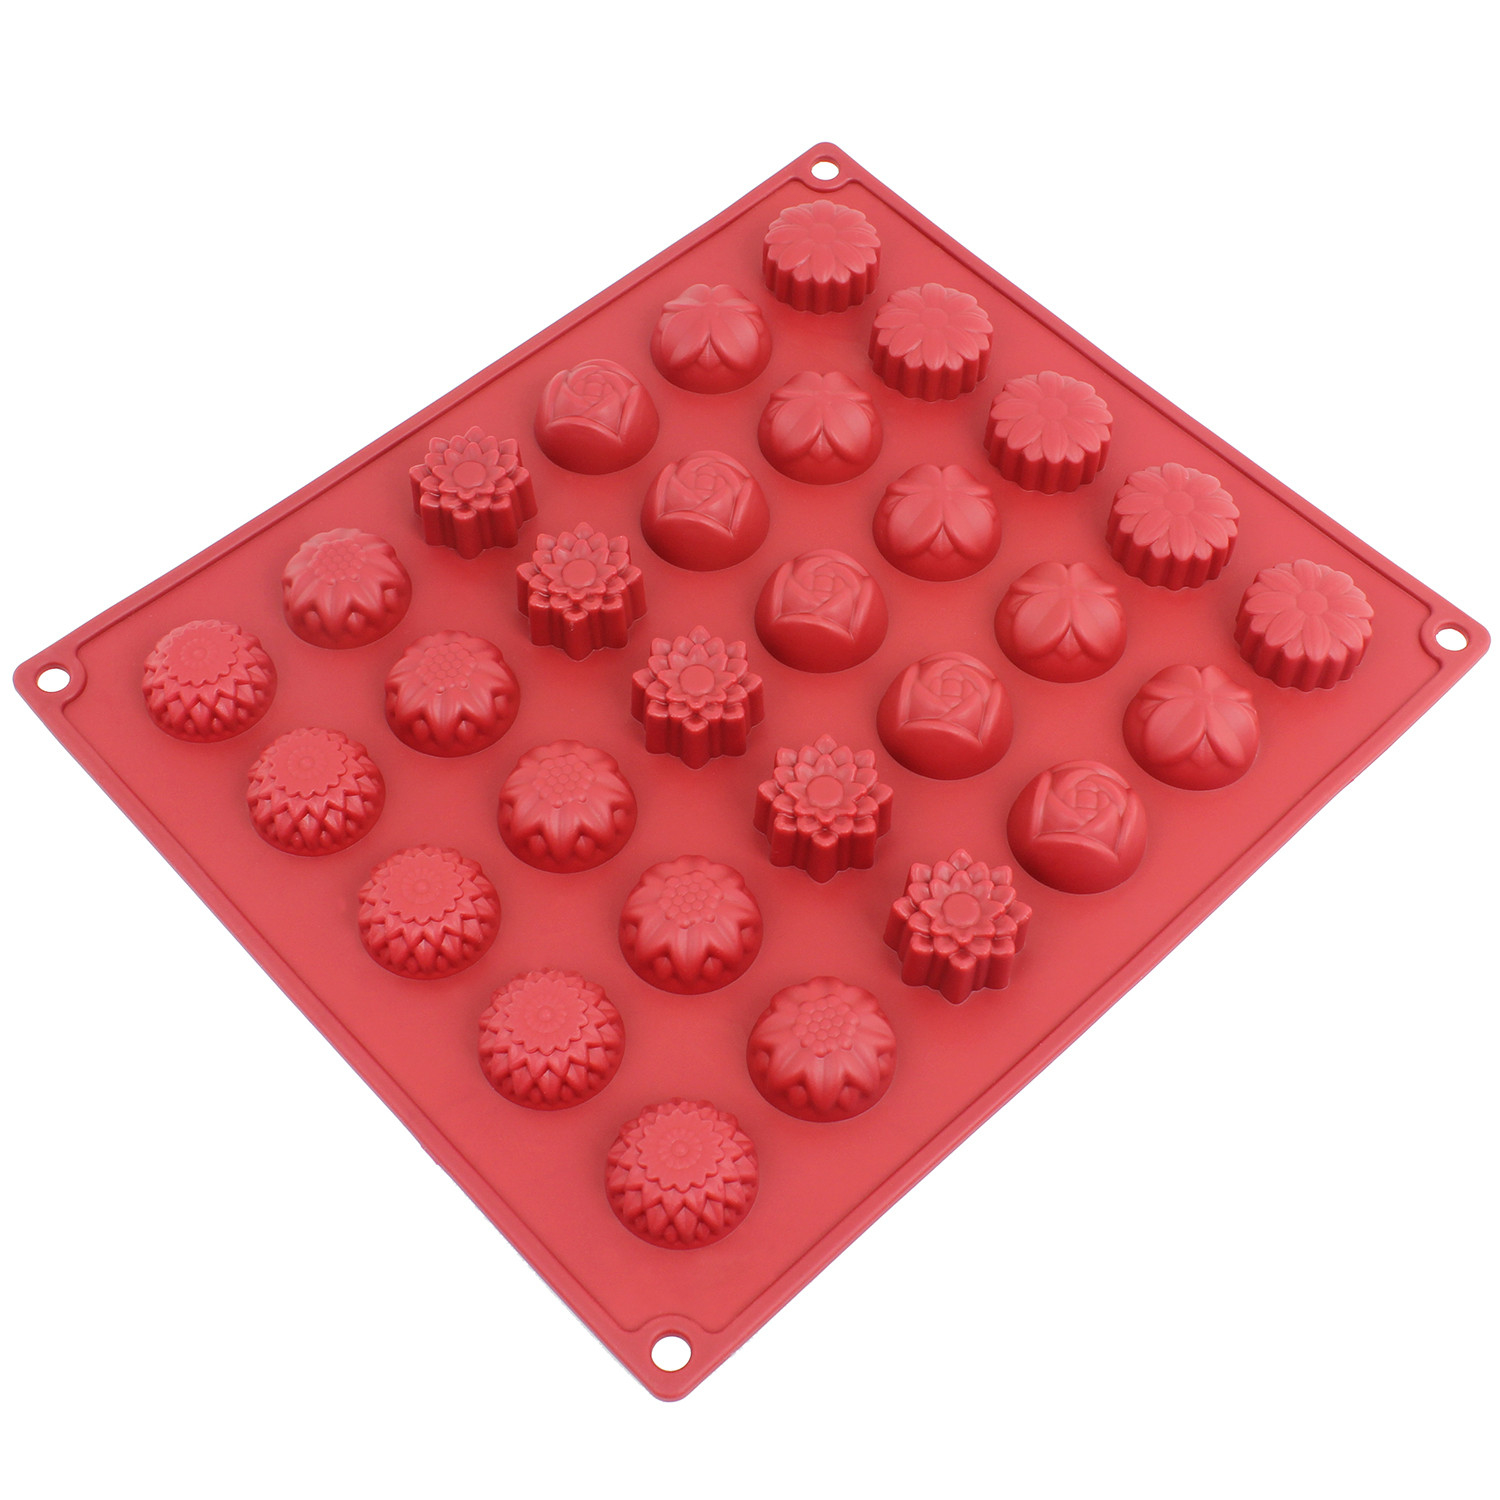 Freshware Silicone Mold, Chocolate Mold, Candy Mold, Ice Mold, Soap Mold for Chocolate, Candy and Gummy, Flower, 30-Cavity